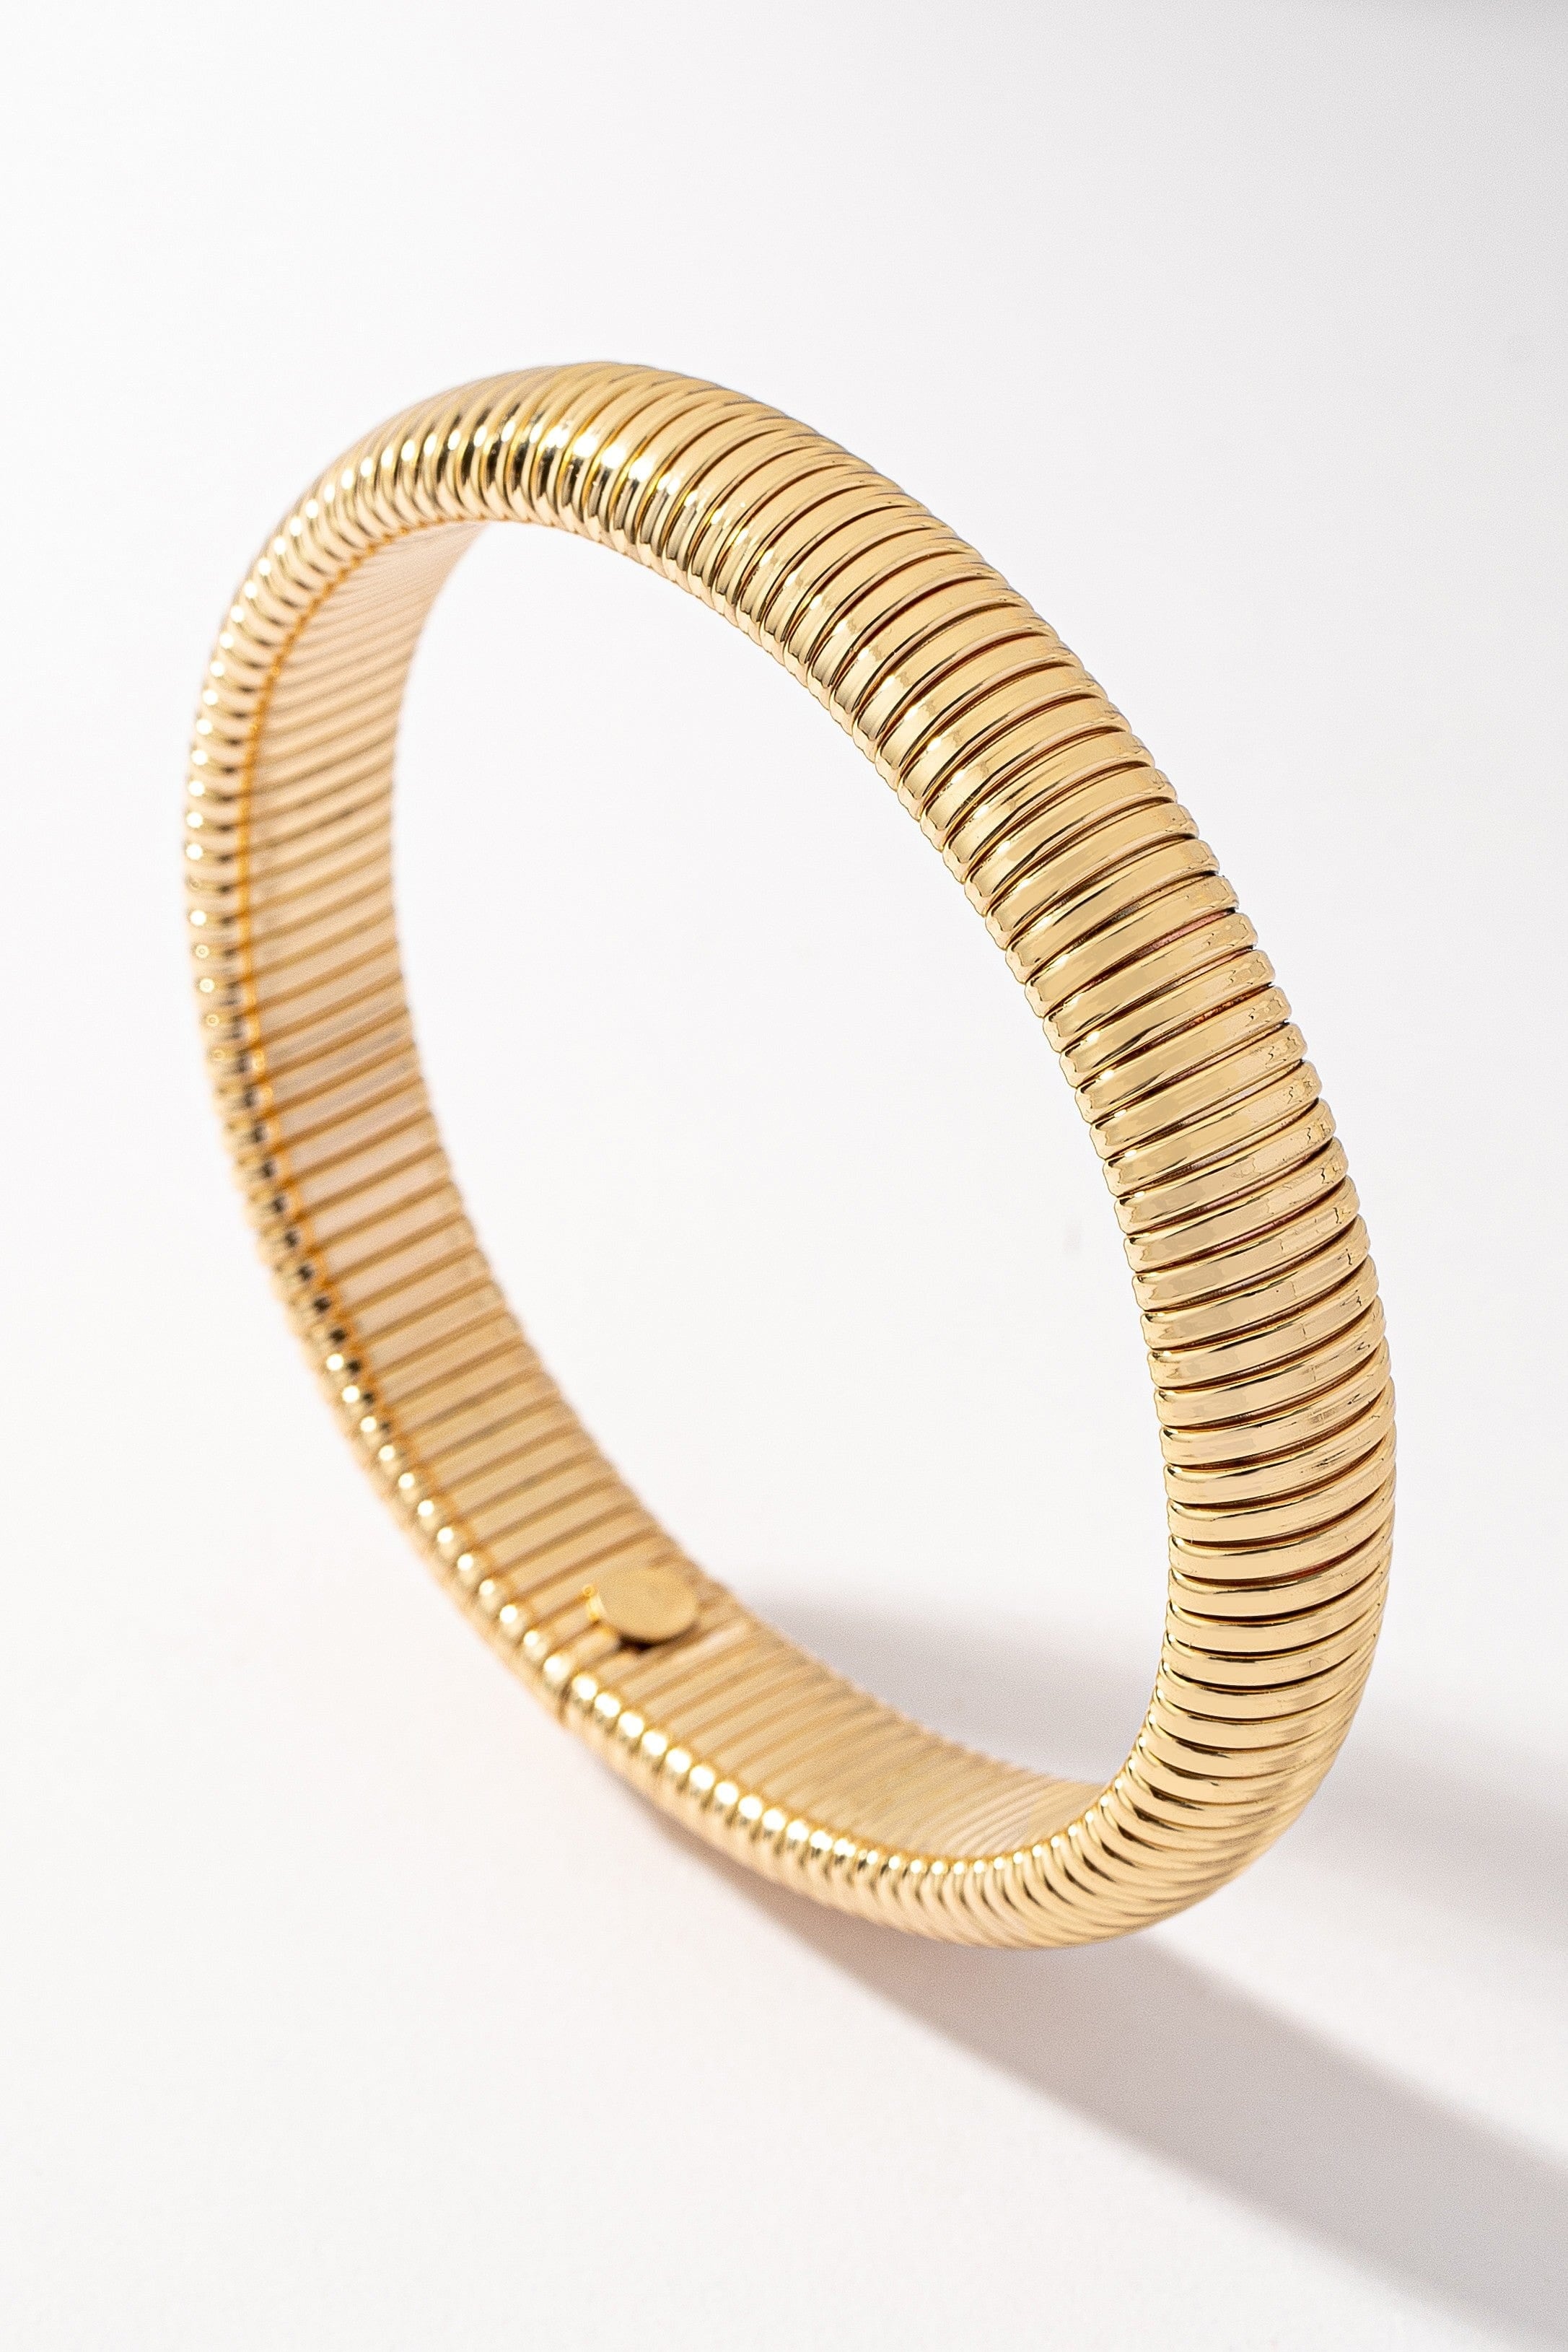 LA3accessories Jewelry - Bracelets 12mm Chunky Snake Chain Stretchy Bangle In Gold 28315126